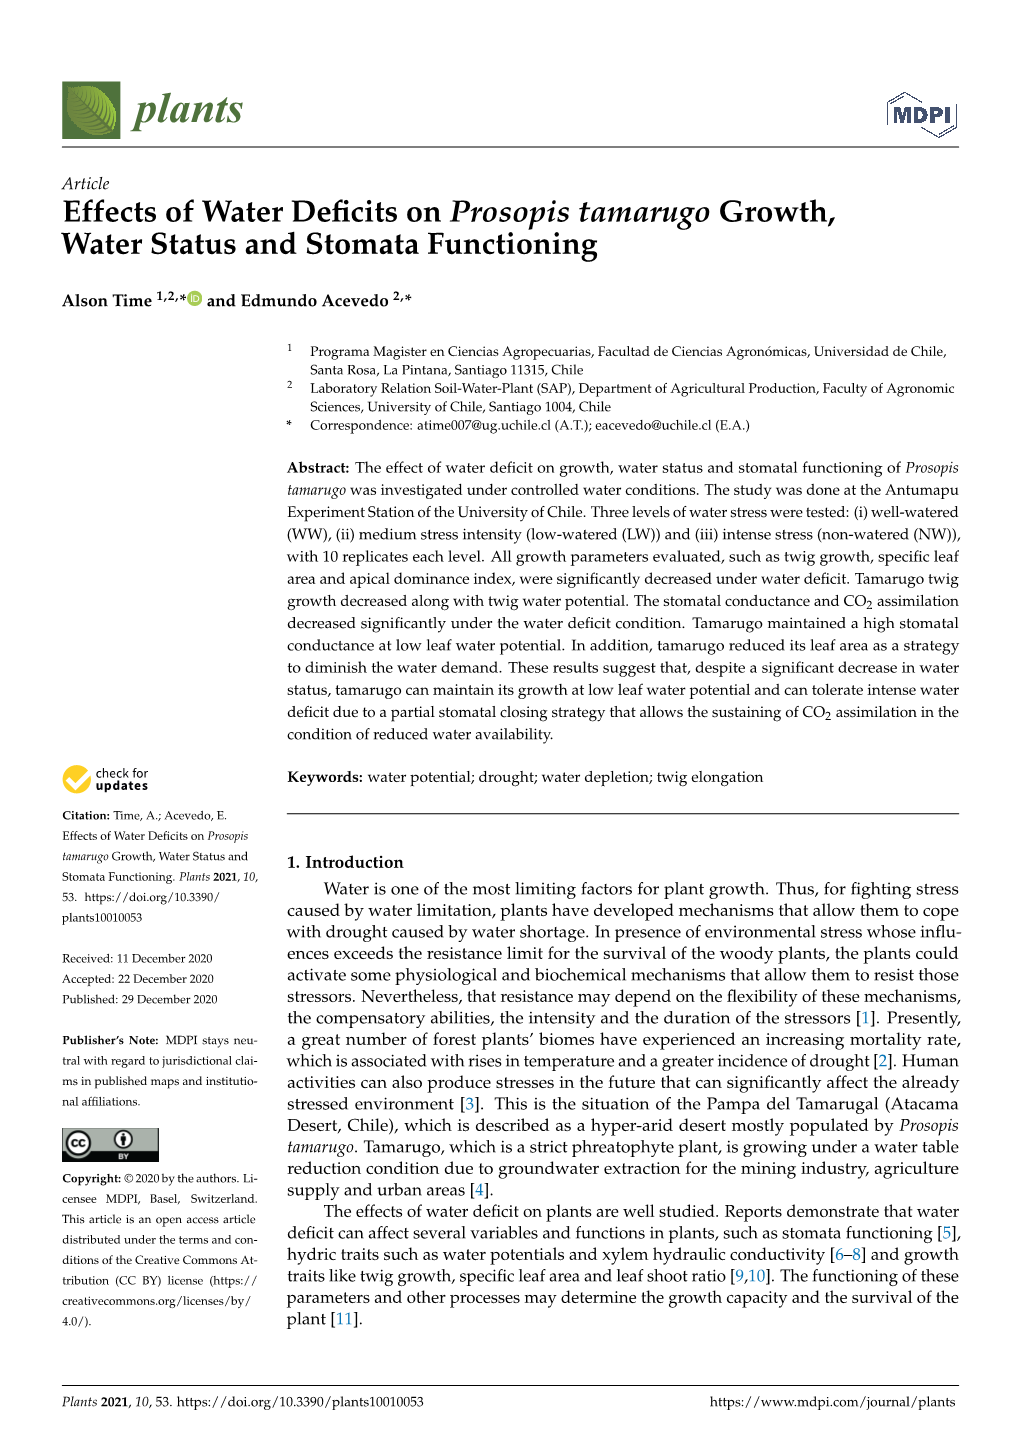 Effects of Water Deficits on Prosopis Tamarugo Growth, Water Status And